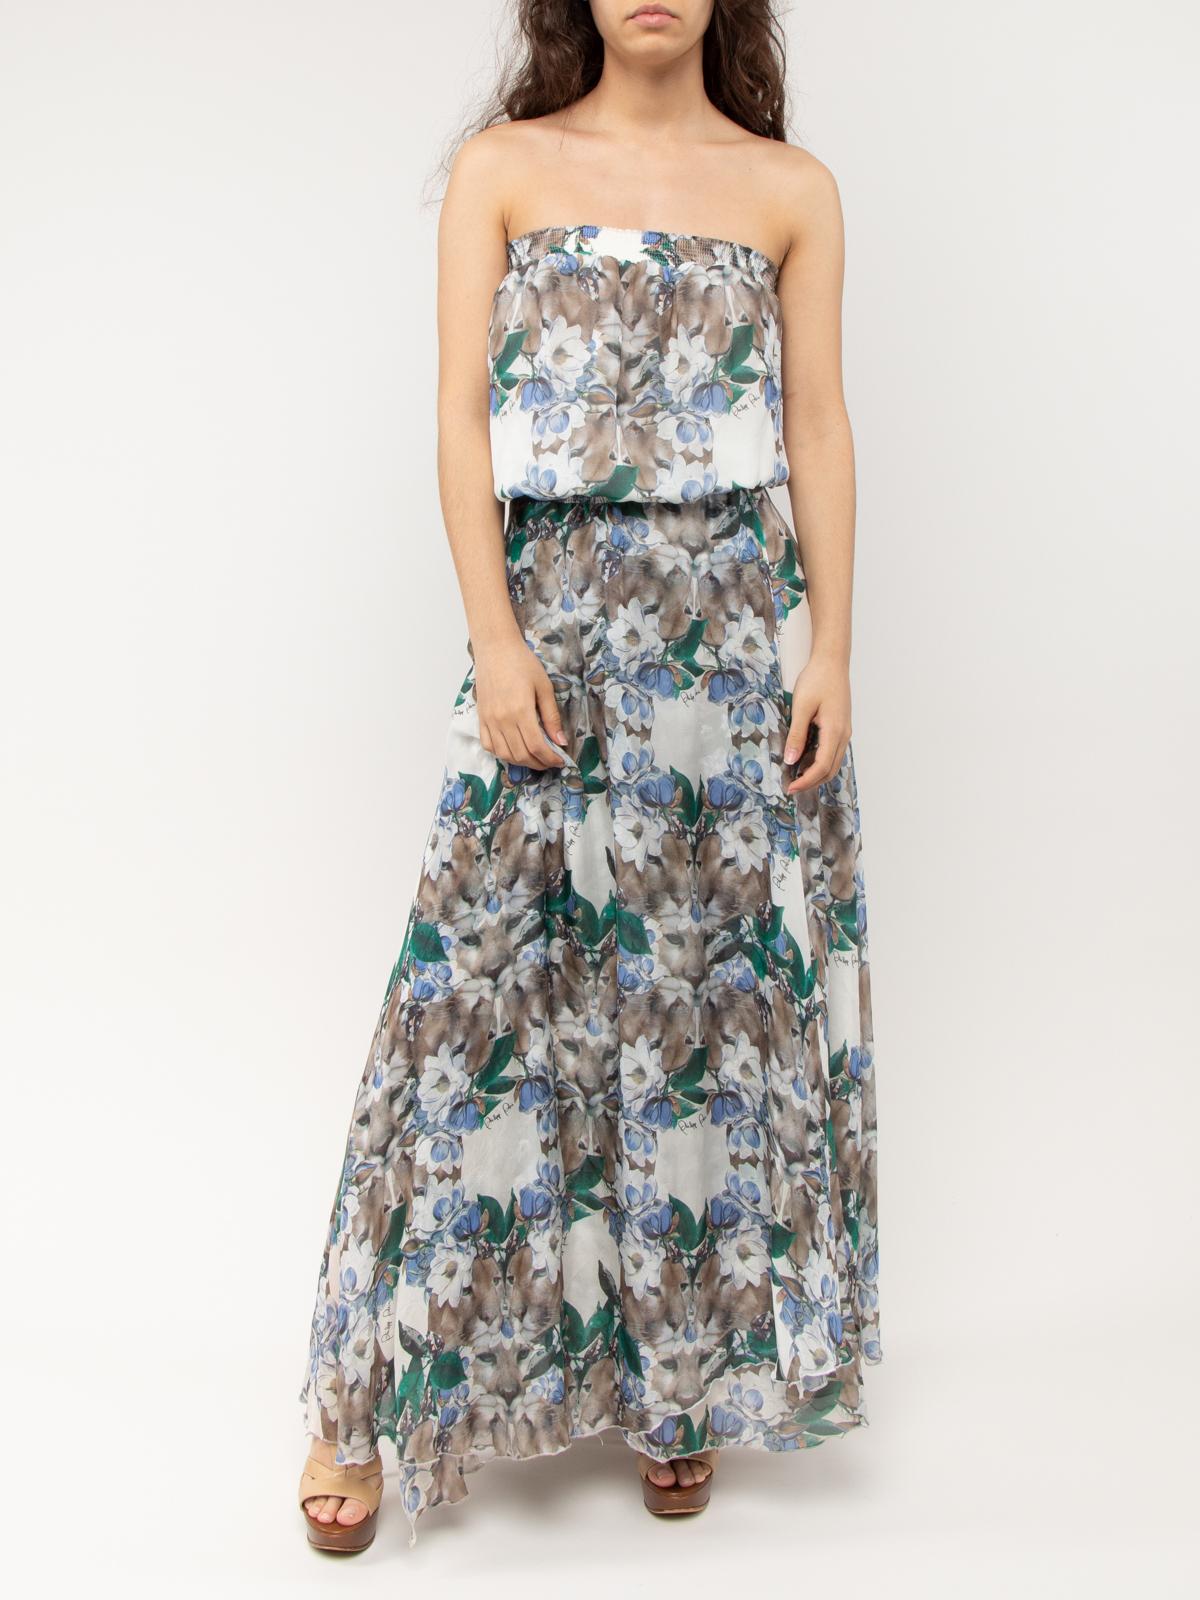 CONDITION is Good. Some wear to dress is evident. Some stains to bottom of lining on this used Philipp Plein Couture designer resale item. Details Philipp Plein Couture Floral print Material - silk Style- strapless maxi dress Fit -Loose fit